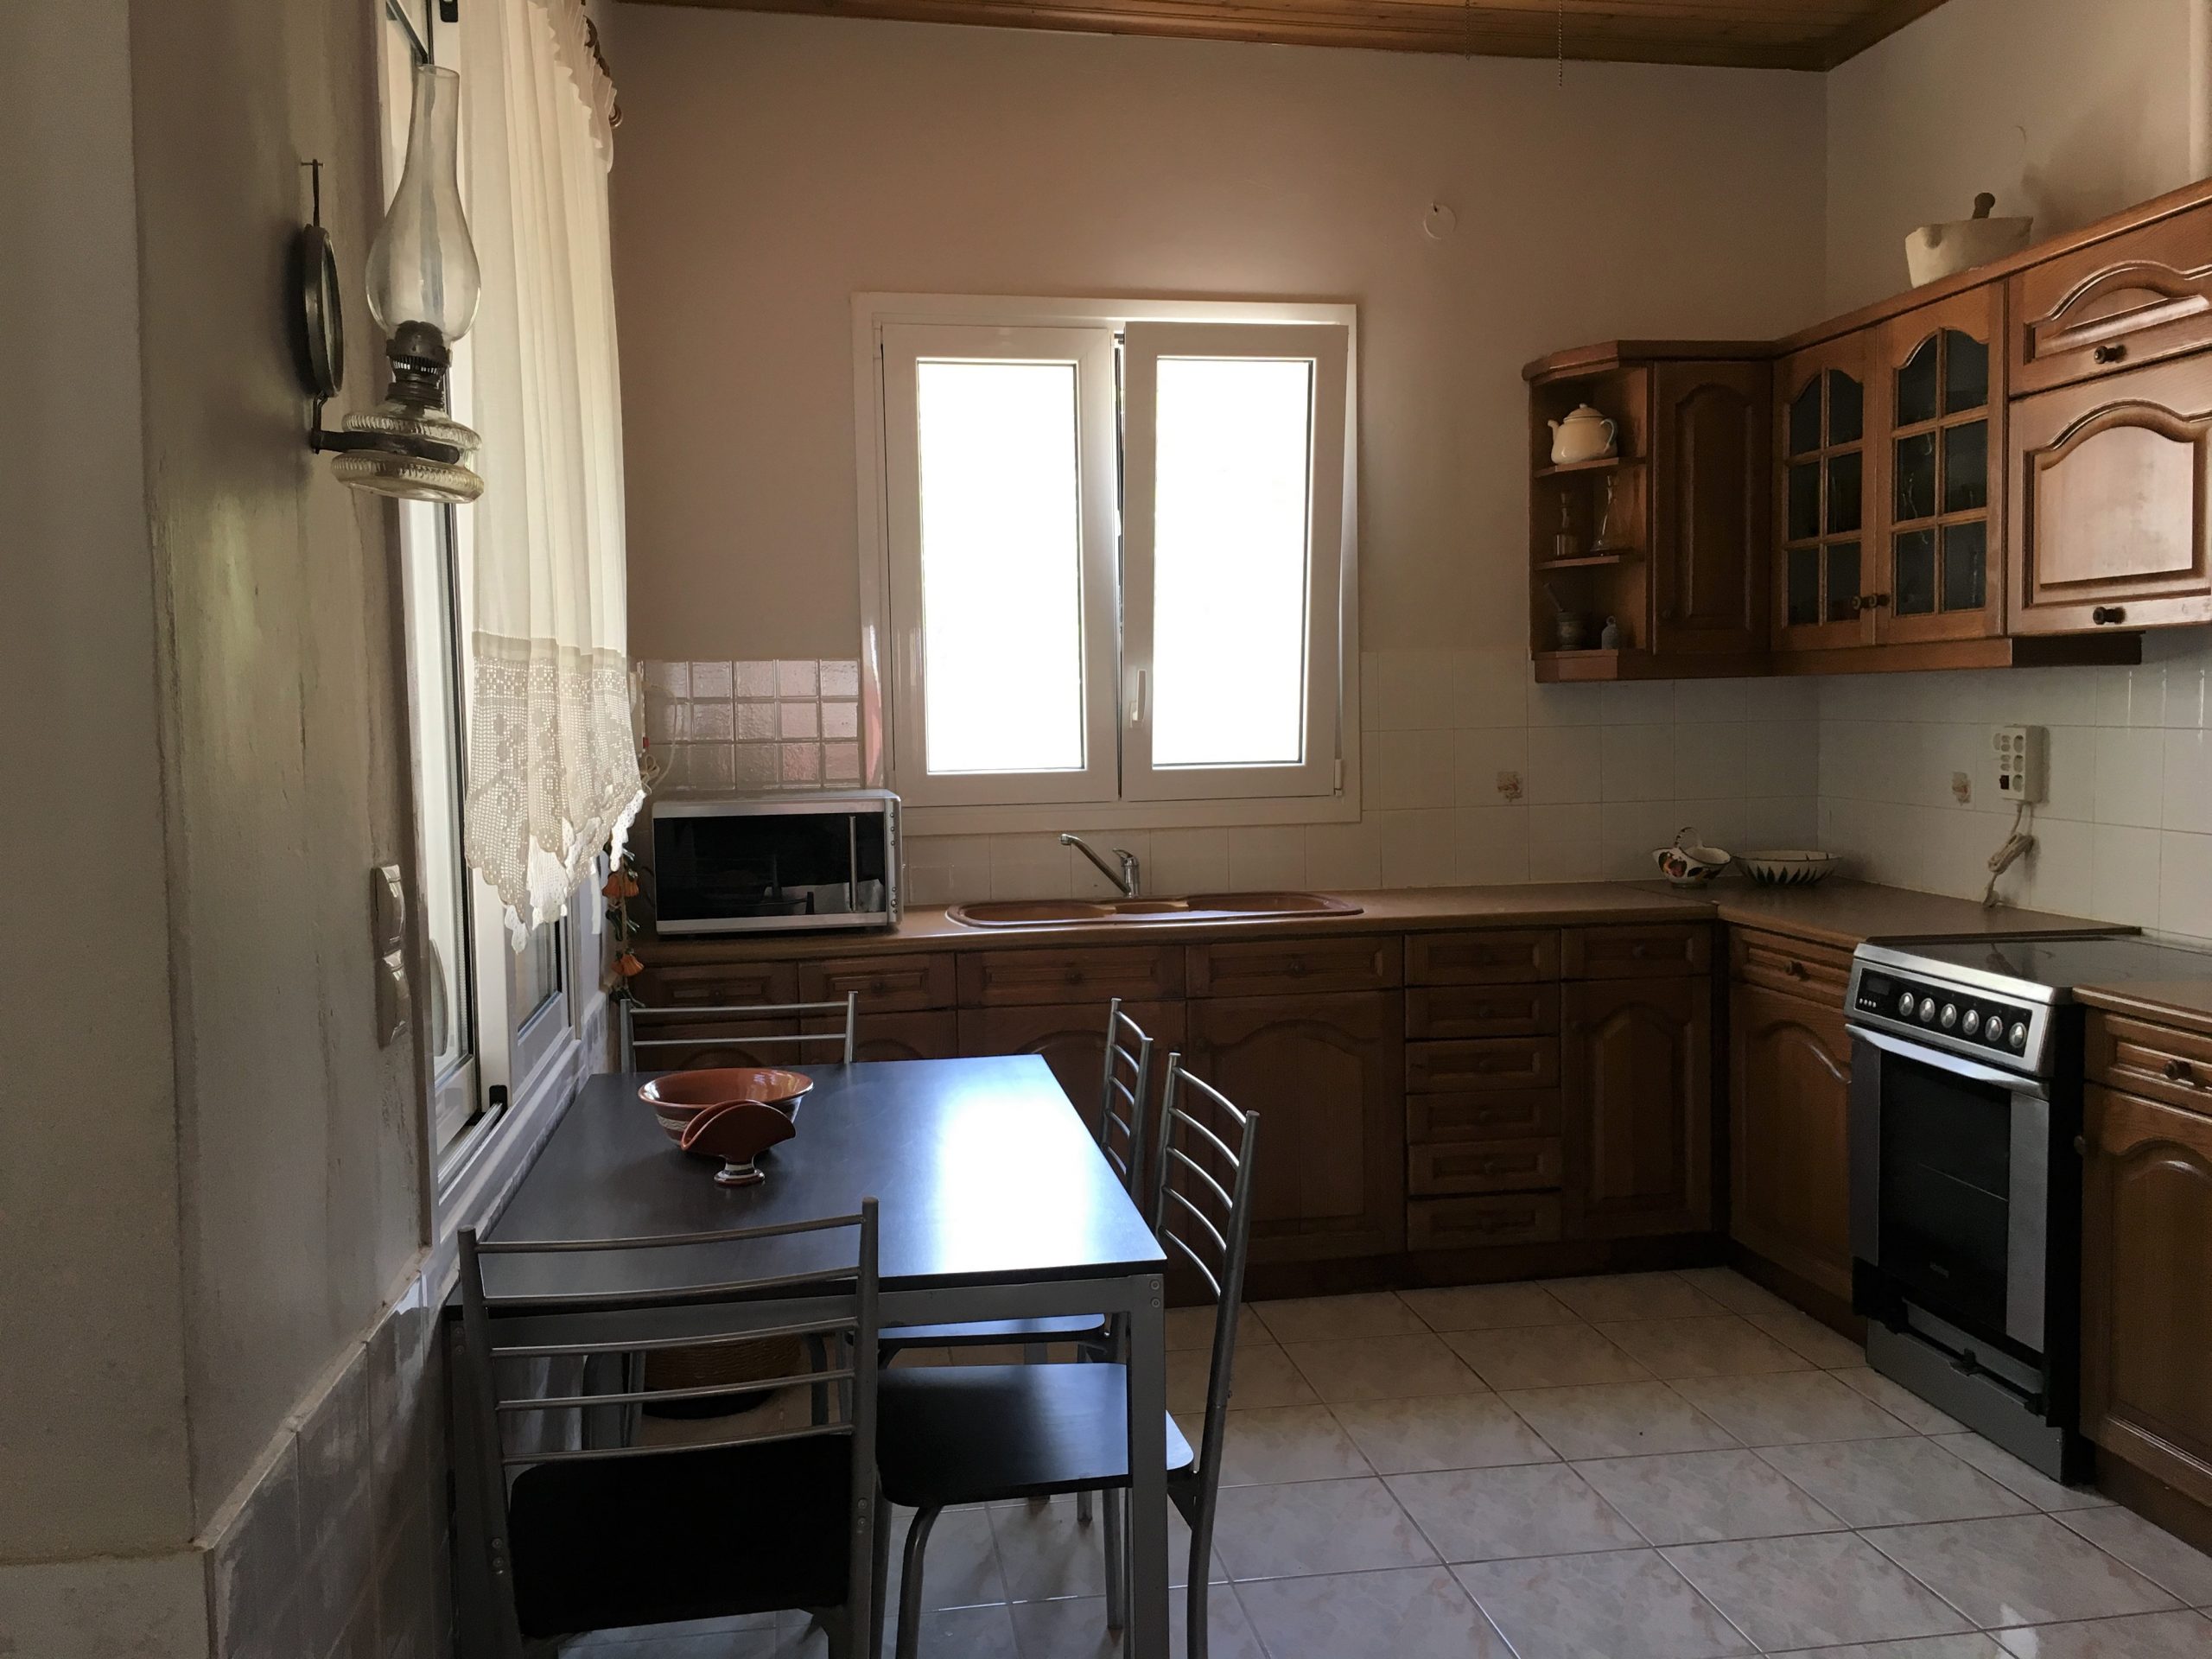 Kitchen of house for rent in Ithaca Greece, Vathi